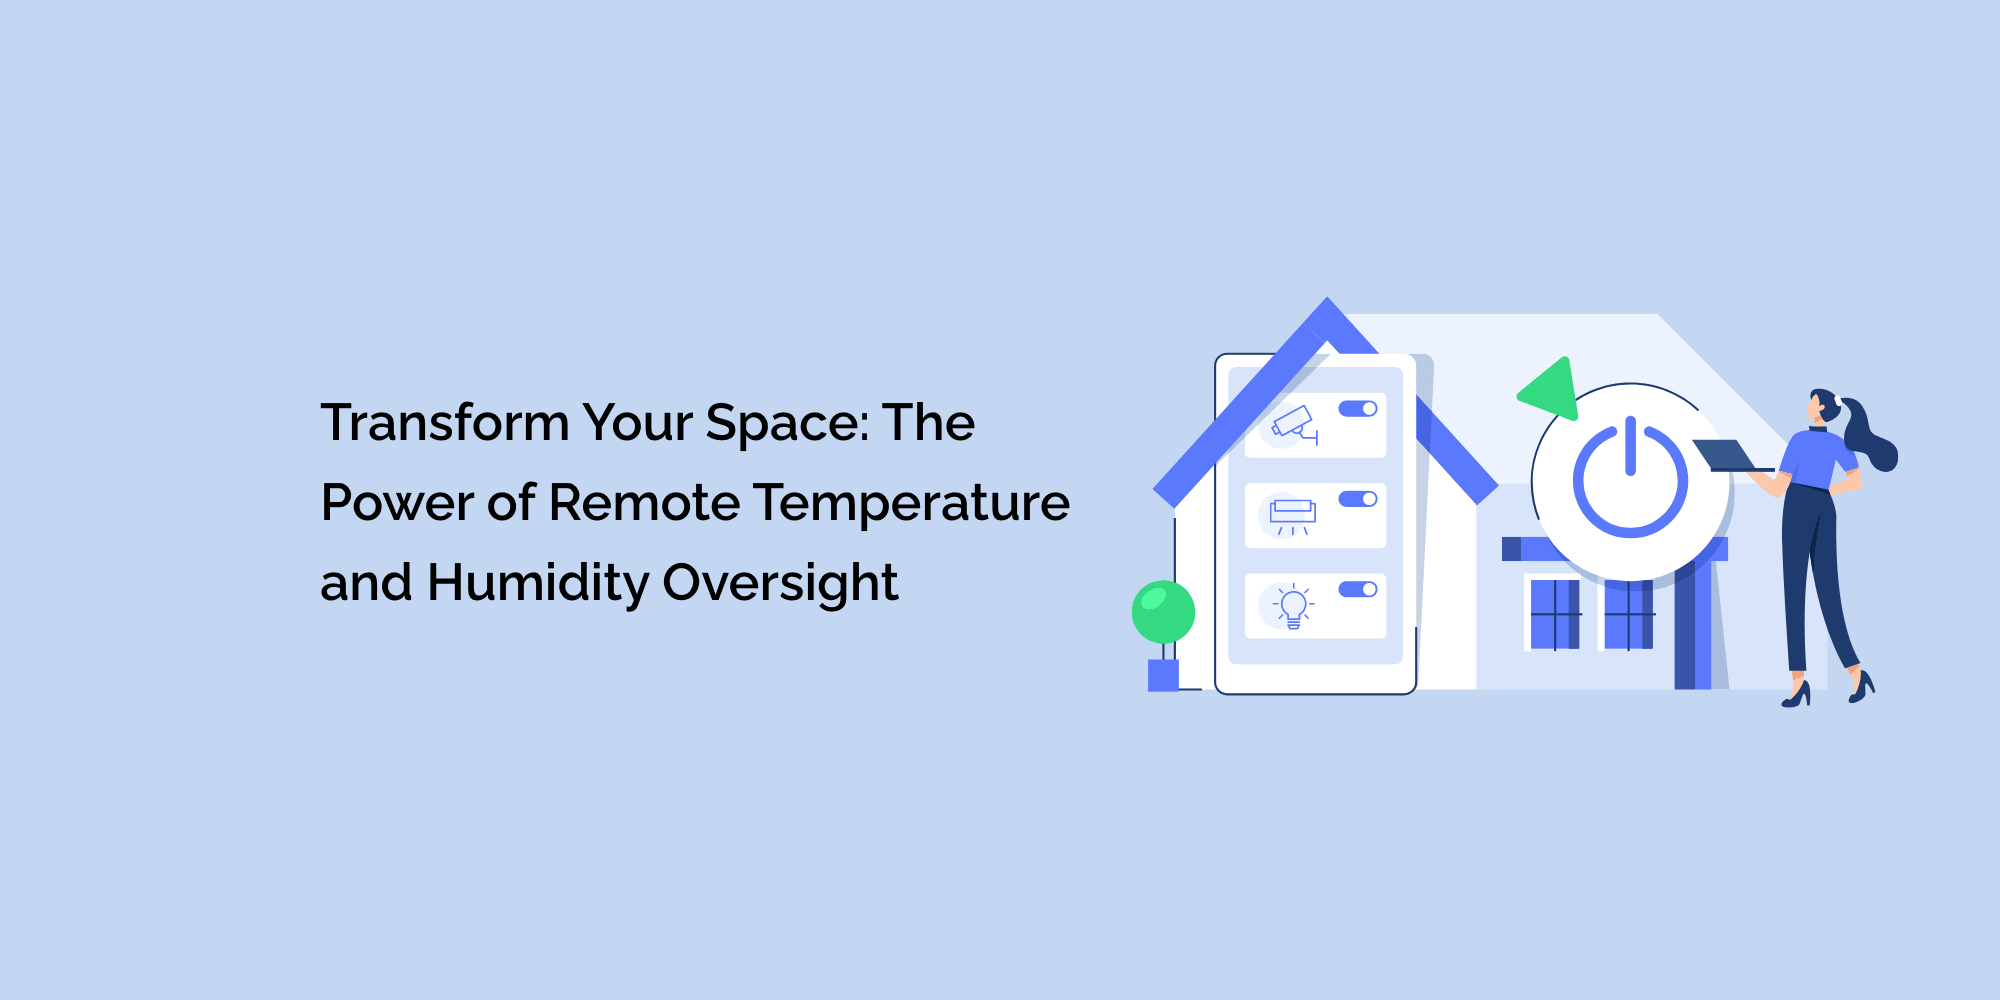 Transform Your Space: The Power of Remote Temperature and Humidity Oversight